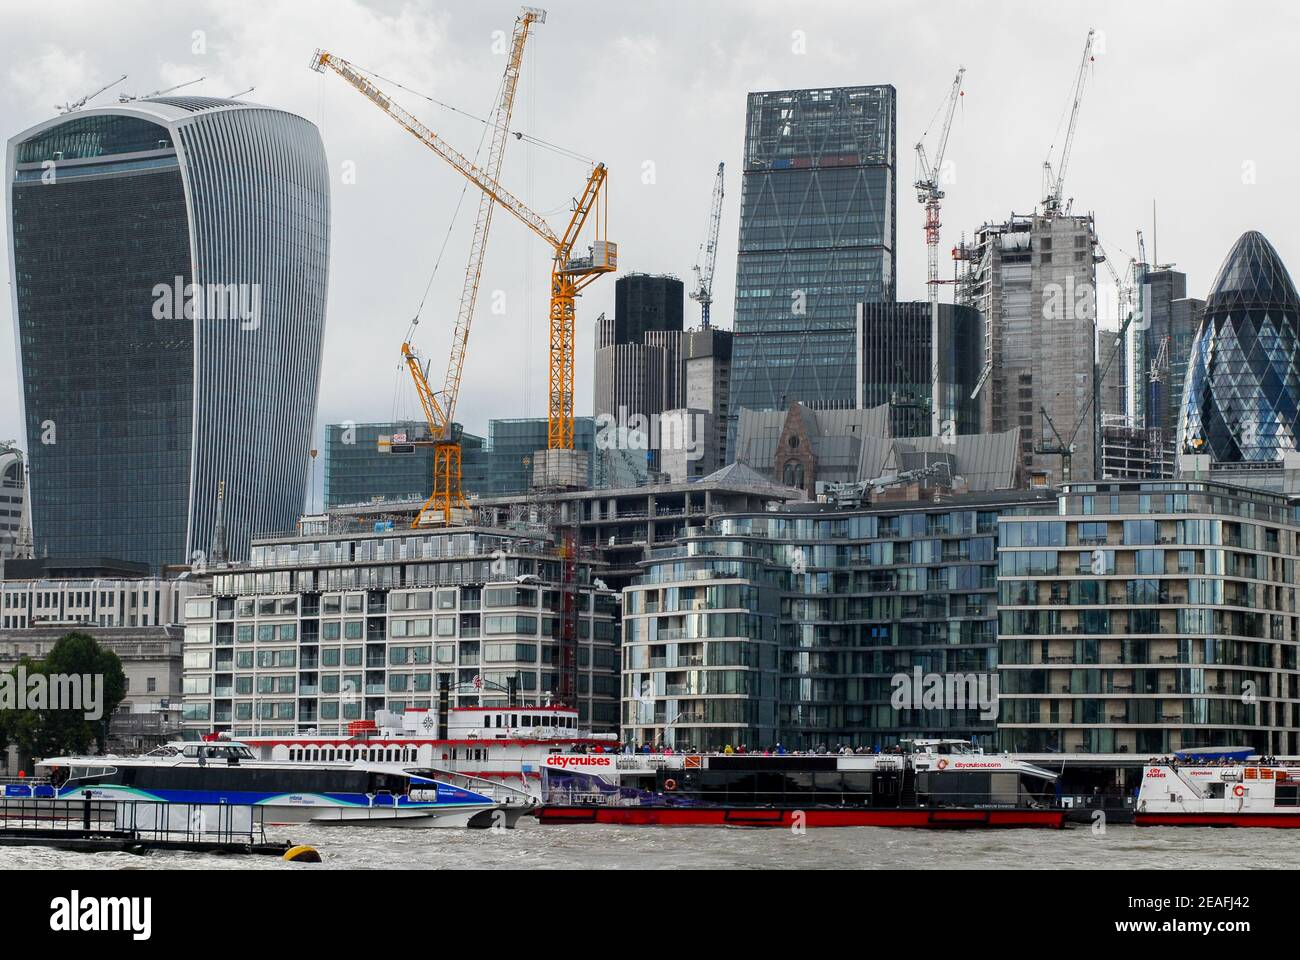 City of London skyline with the Walkie Talkie, the Gherkin the Nat West Tower from the River Thames, London, UK Stock Photo